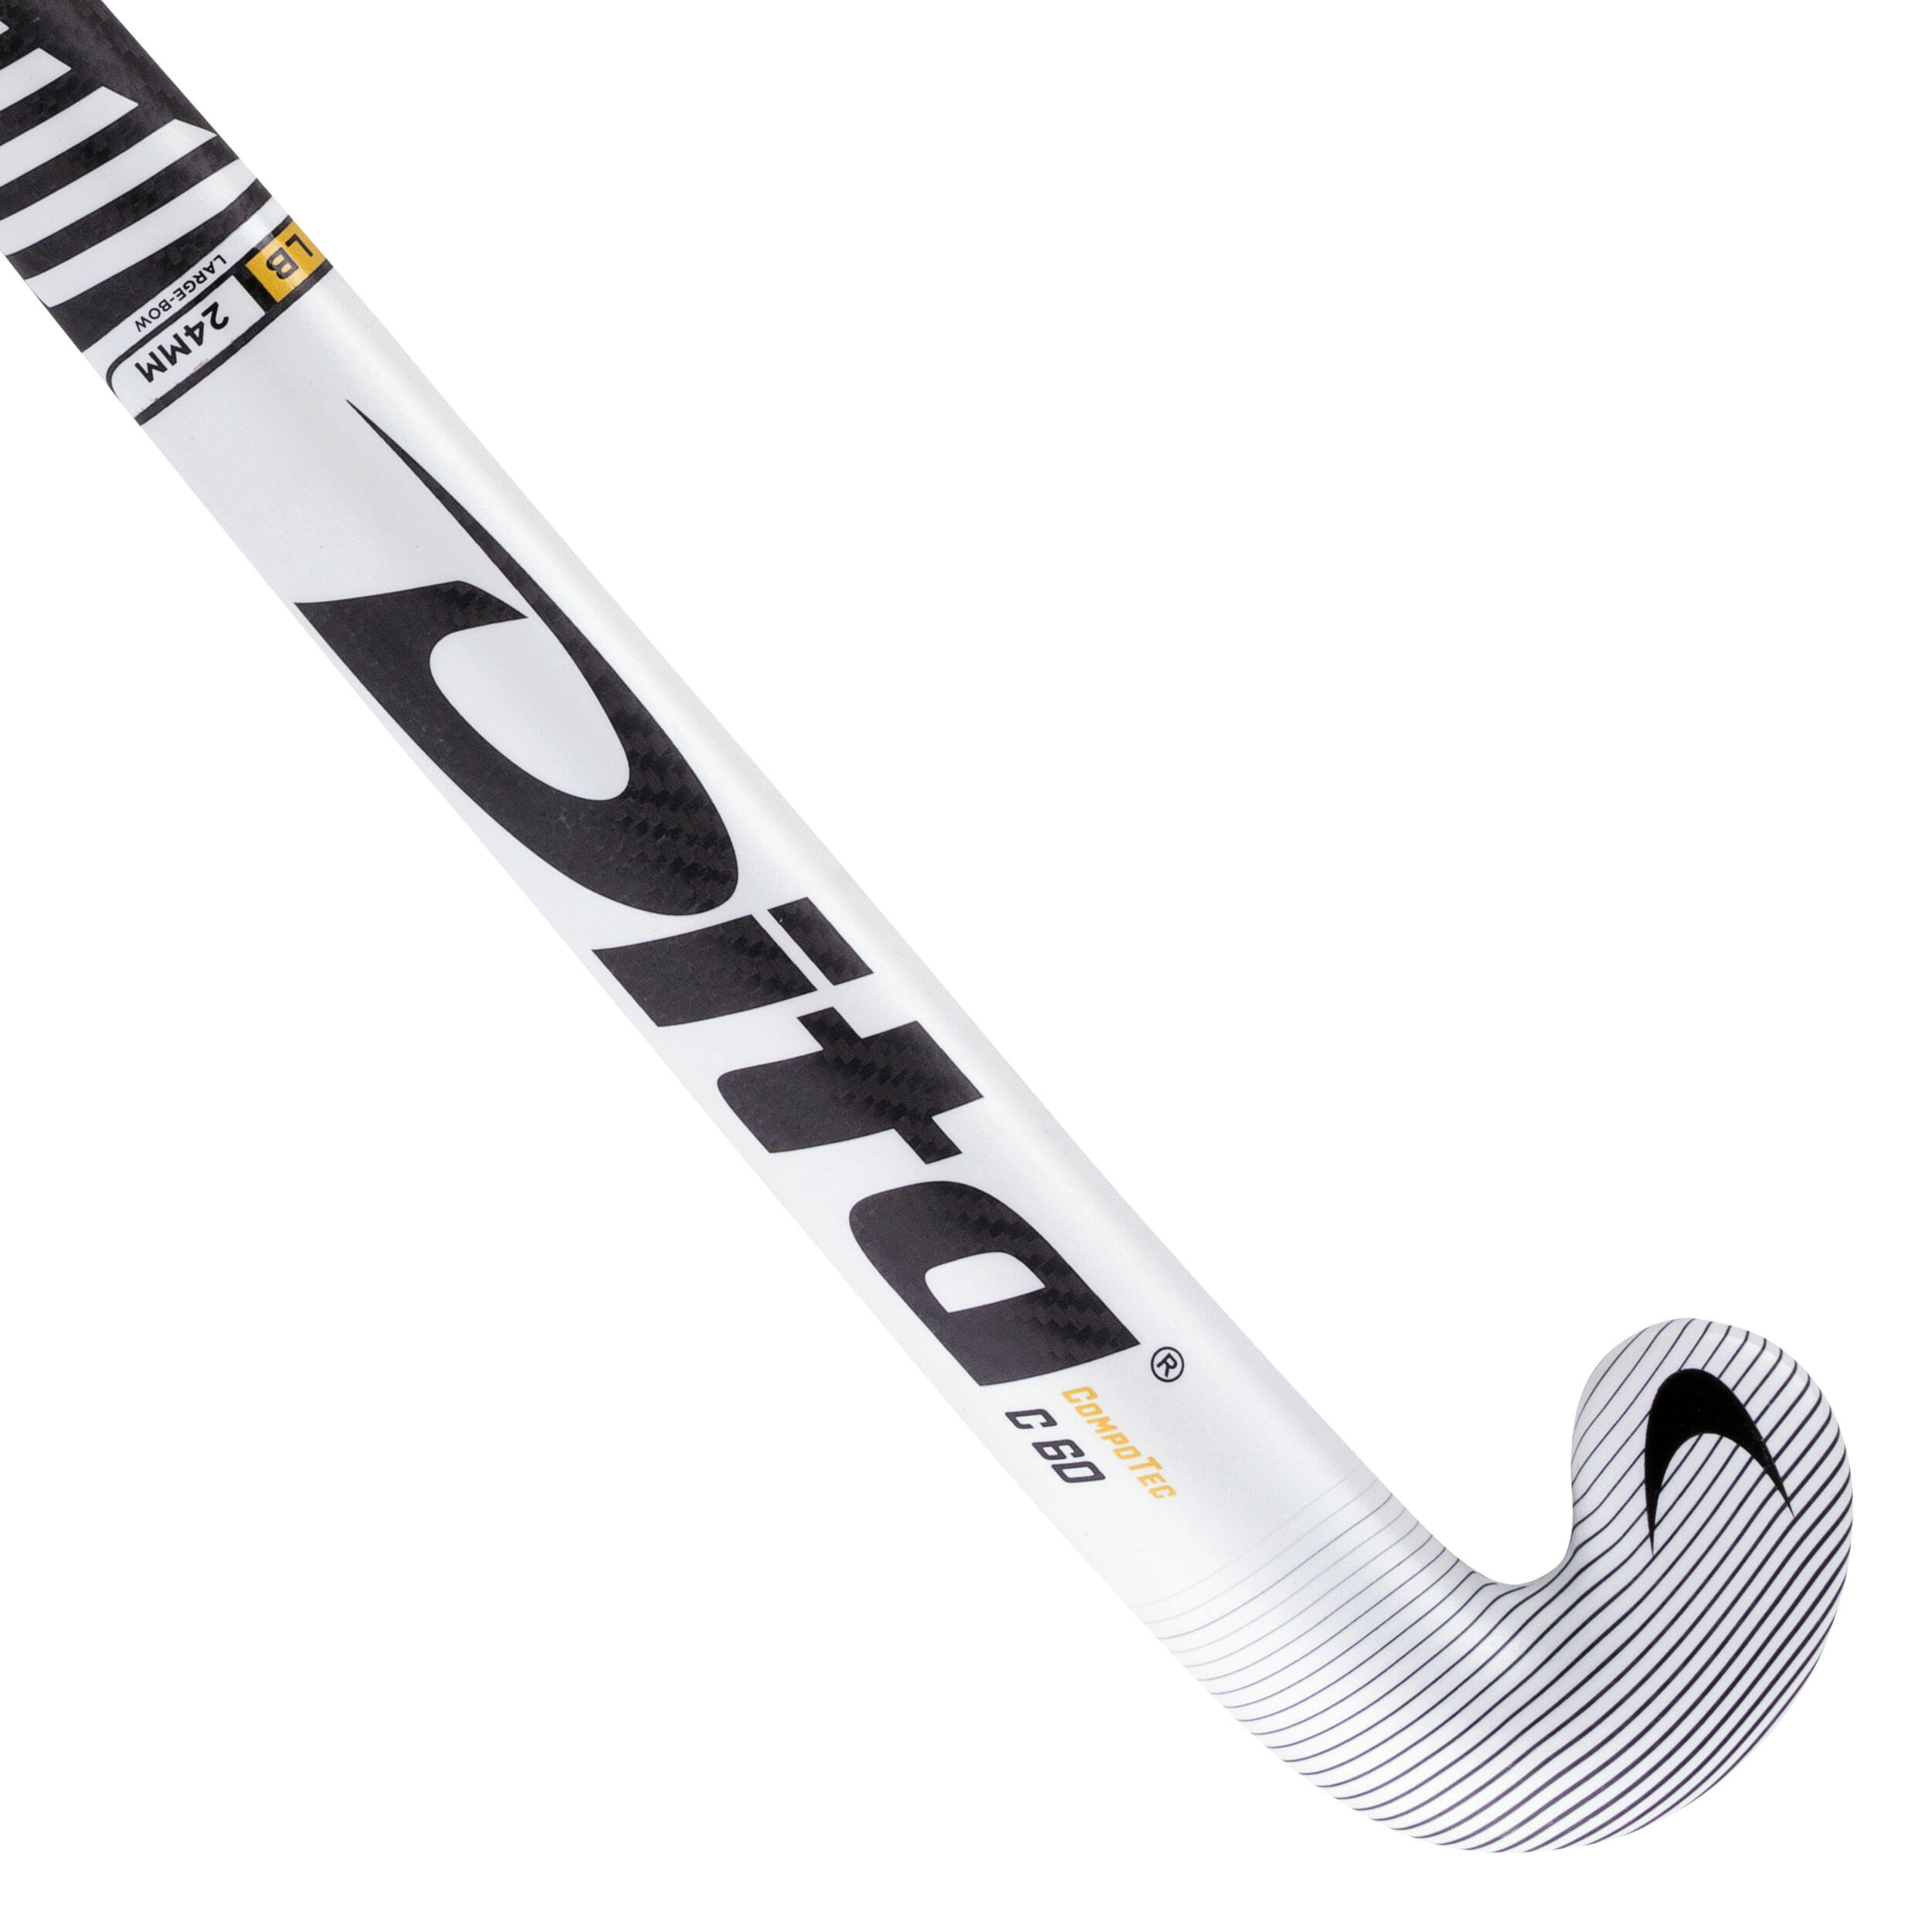 Adult Intermediate 60% Carbon Low Bow Field Hockey Stick CompotecC60 - White/Black 9/12